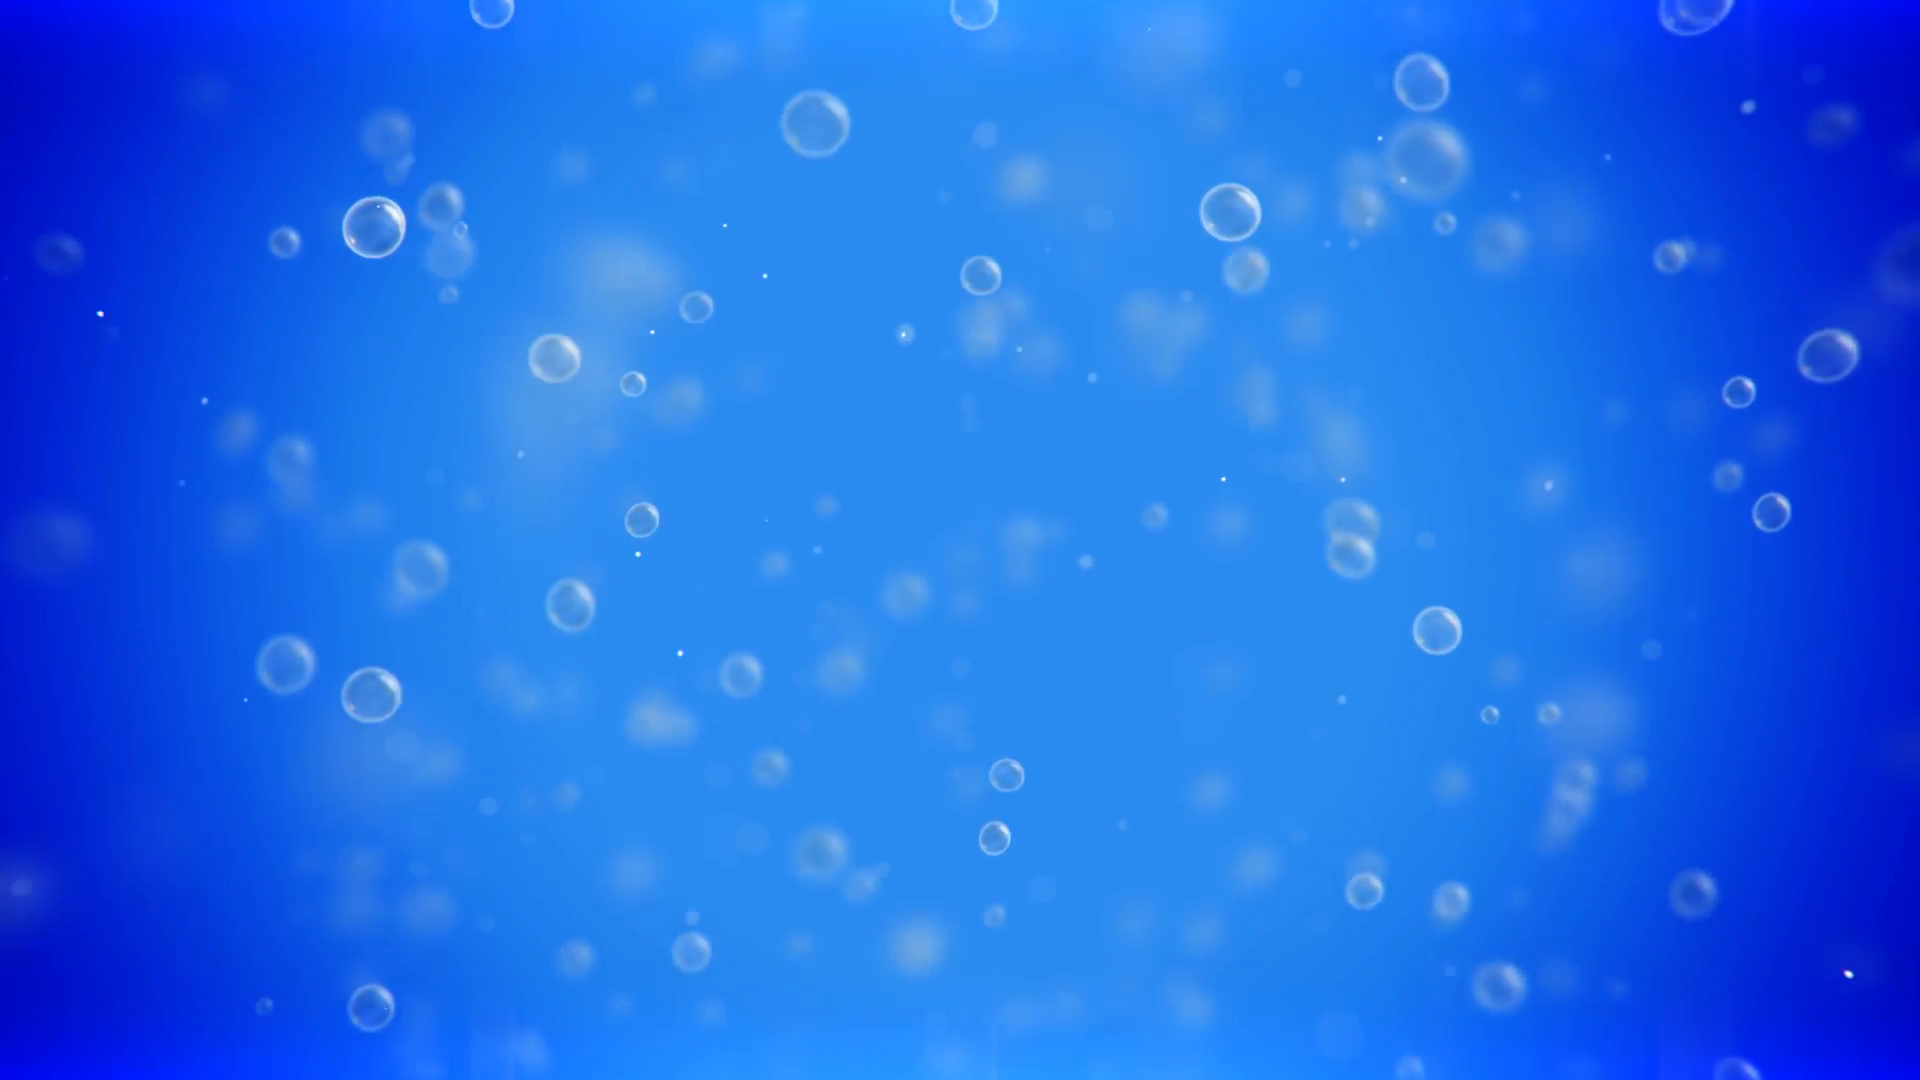 Bubbles Background Photo - Blue Background With Bubbles - HD Wallpaper 